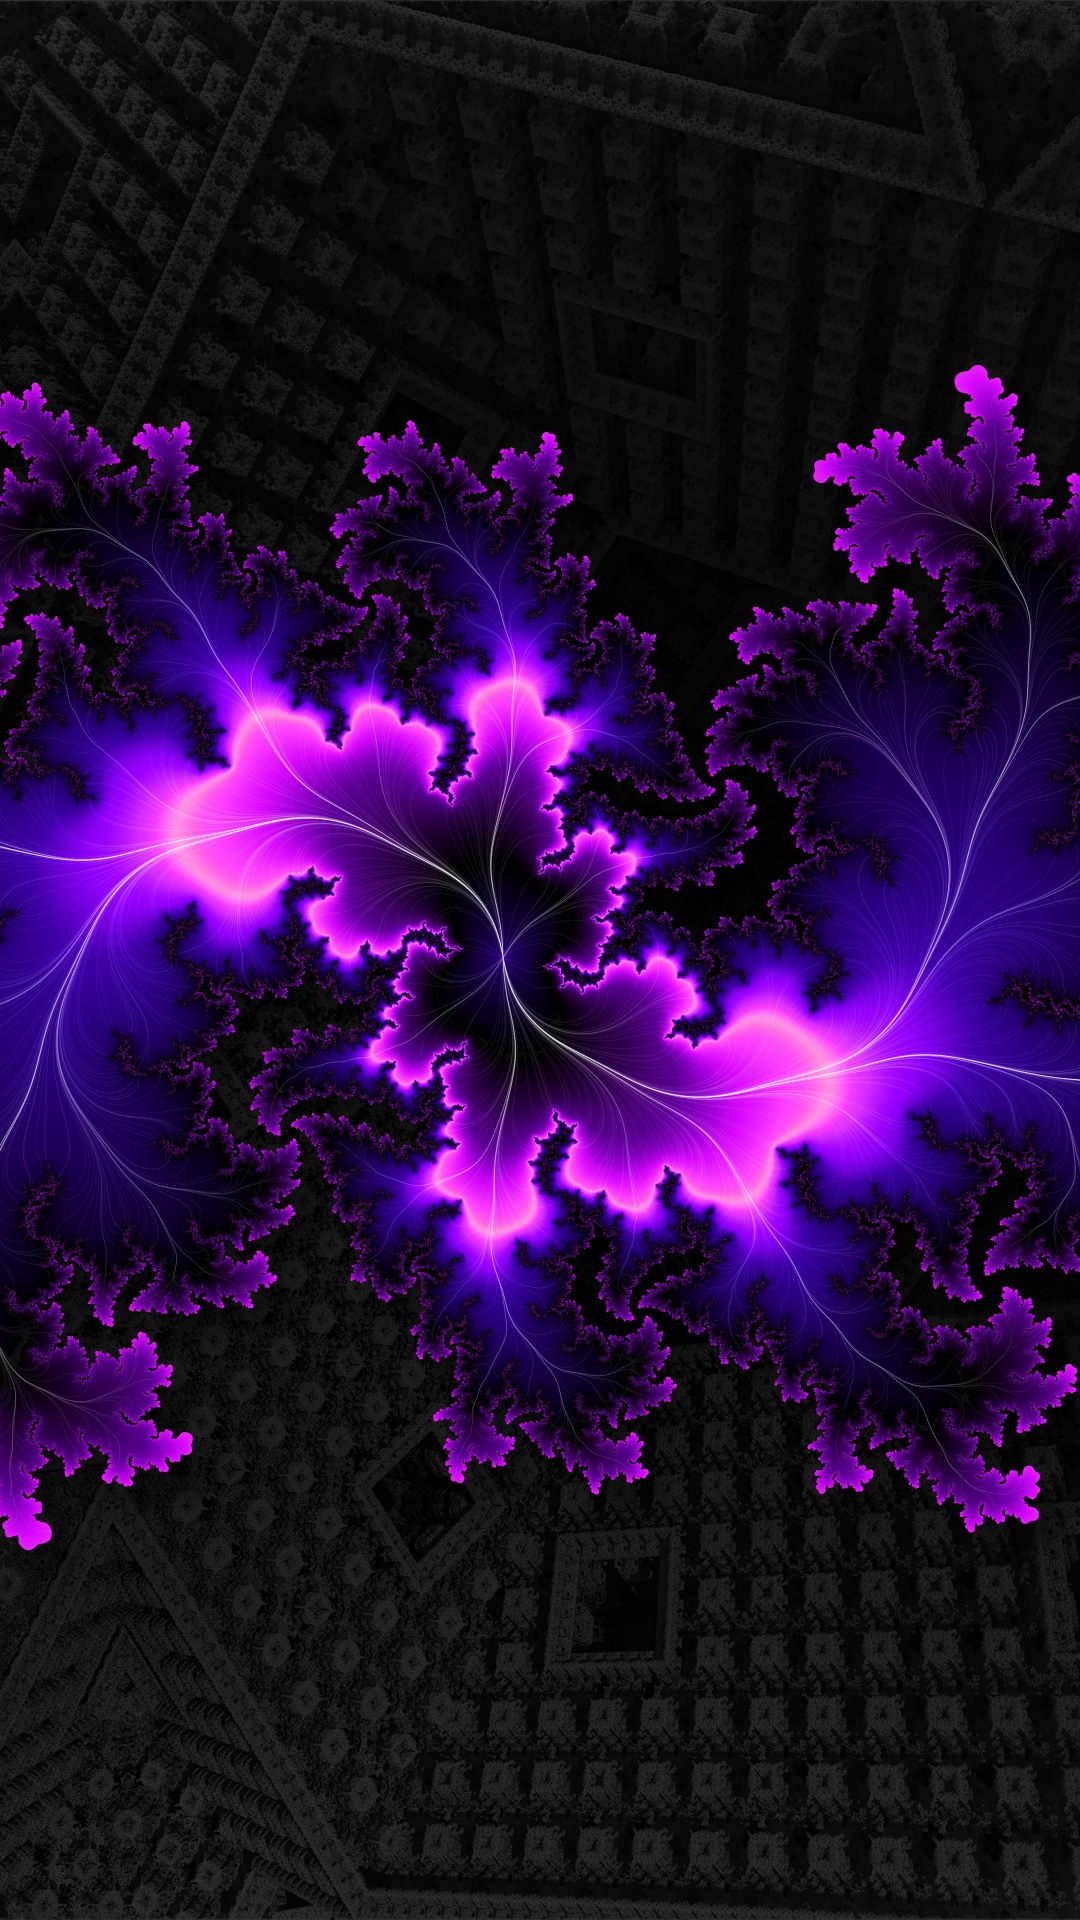 Purple Flower Petals on Black and White Textile. Wallpaper in 1080x1920 Resolution